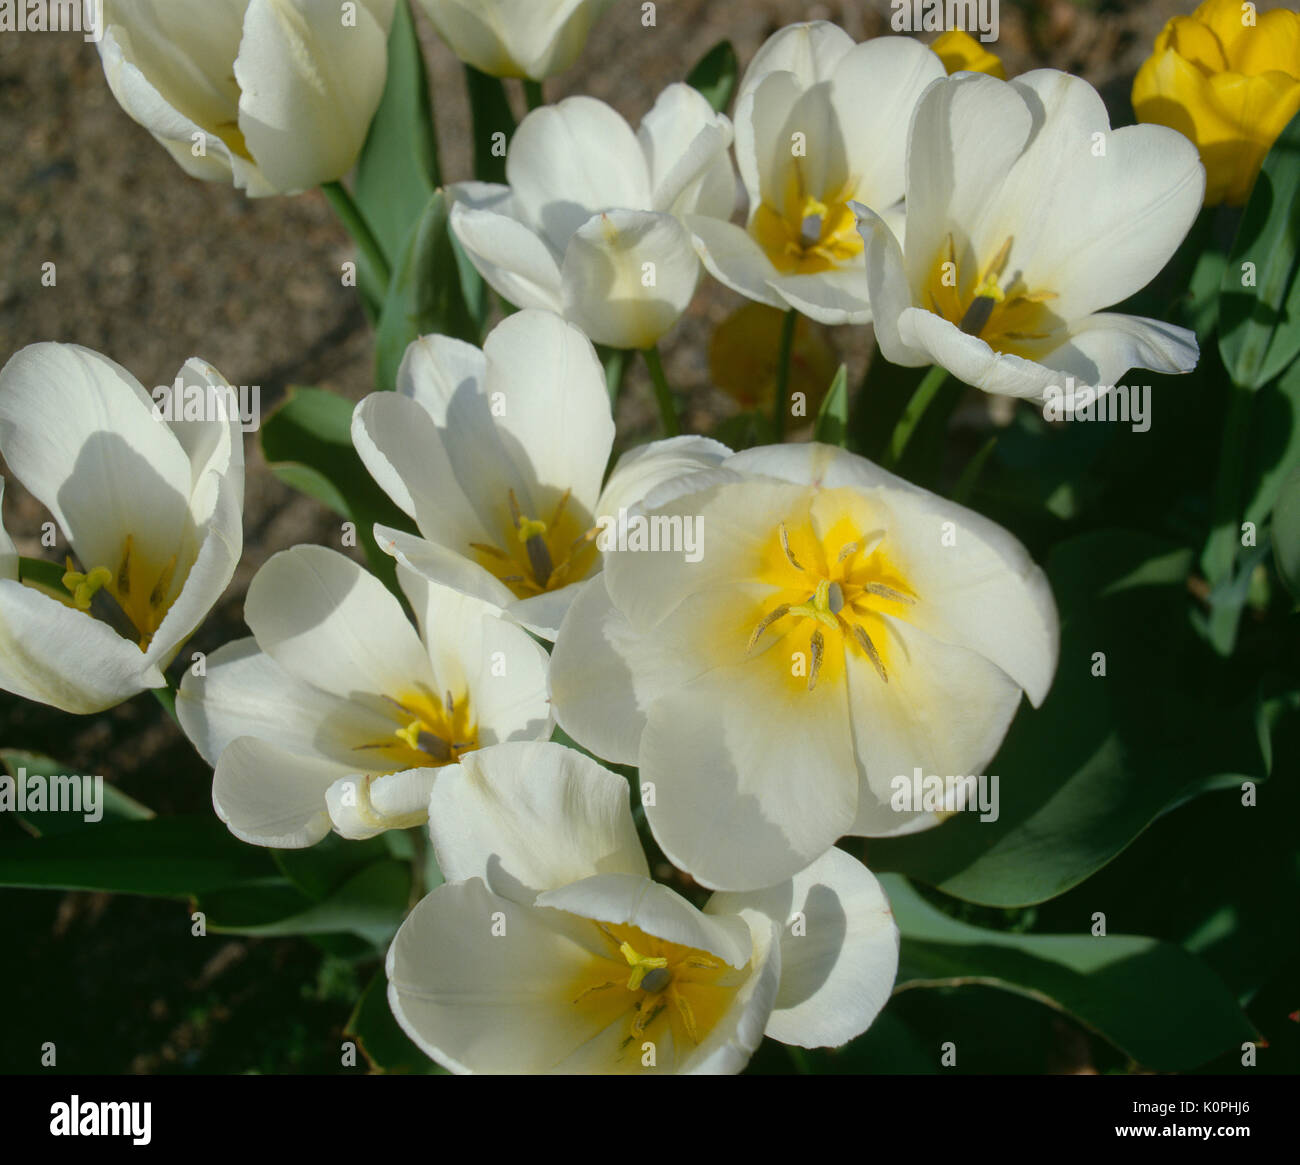 CLOSE UP OF WHITE TULIPS (TULIPA SP.) Banque D'Images